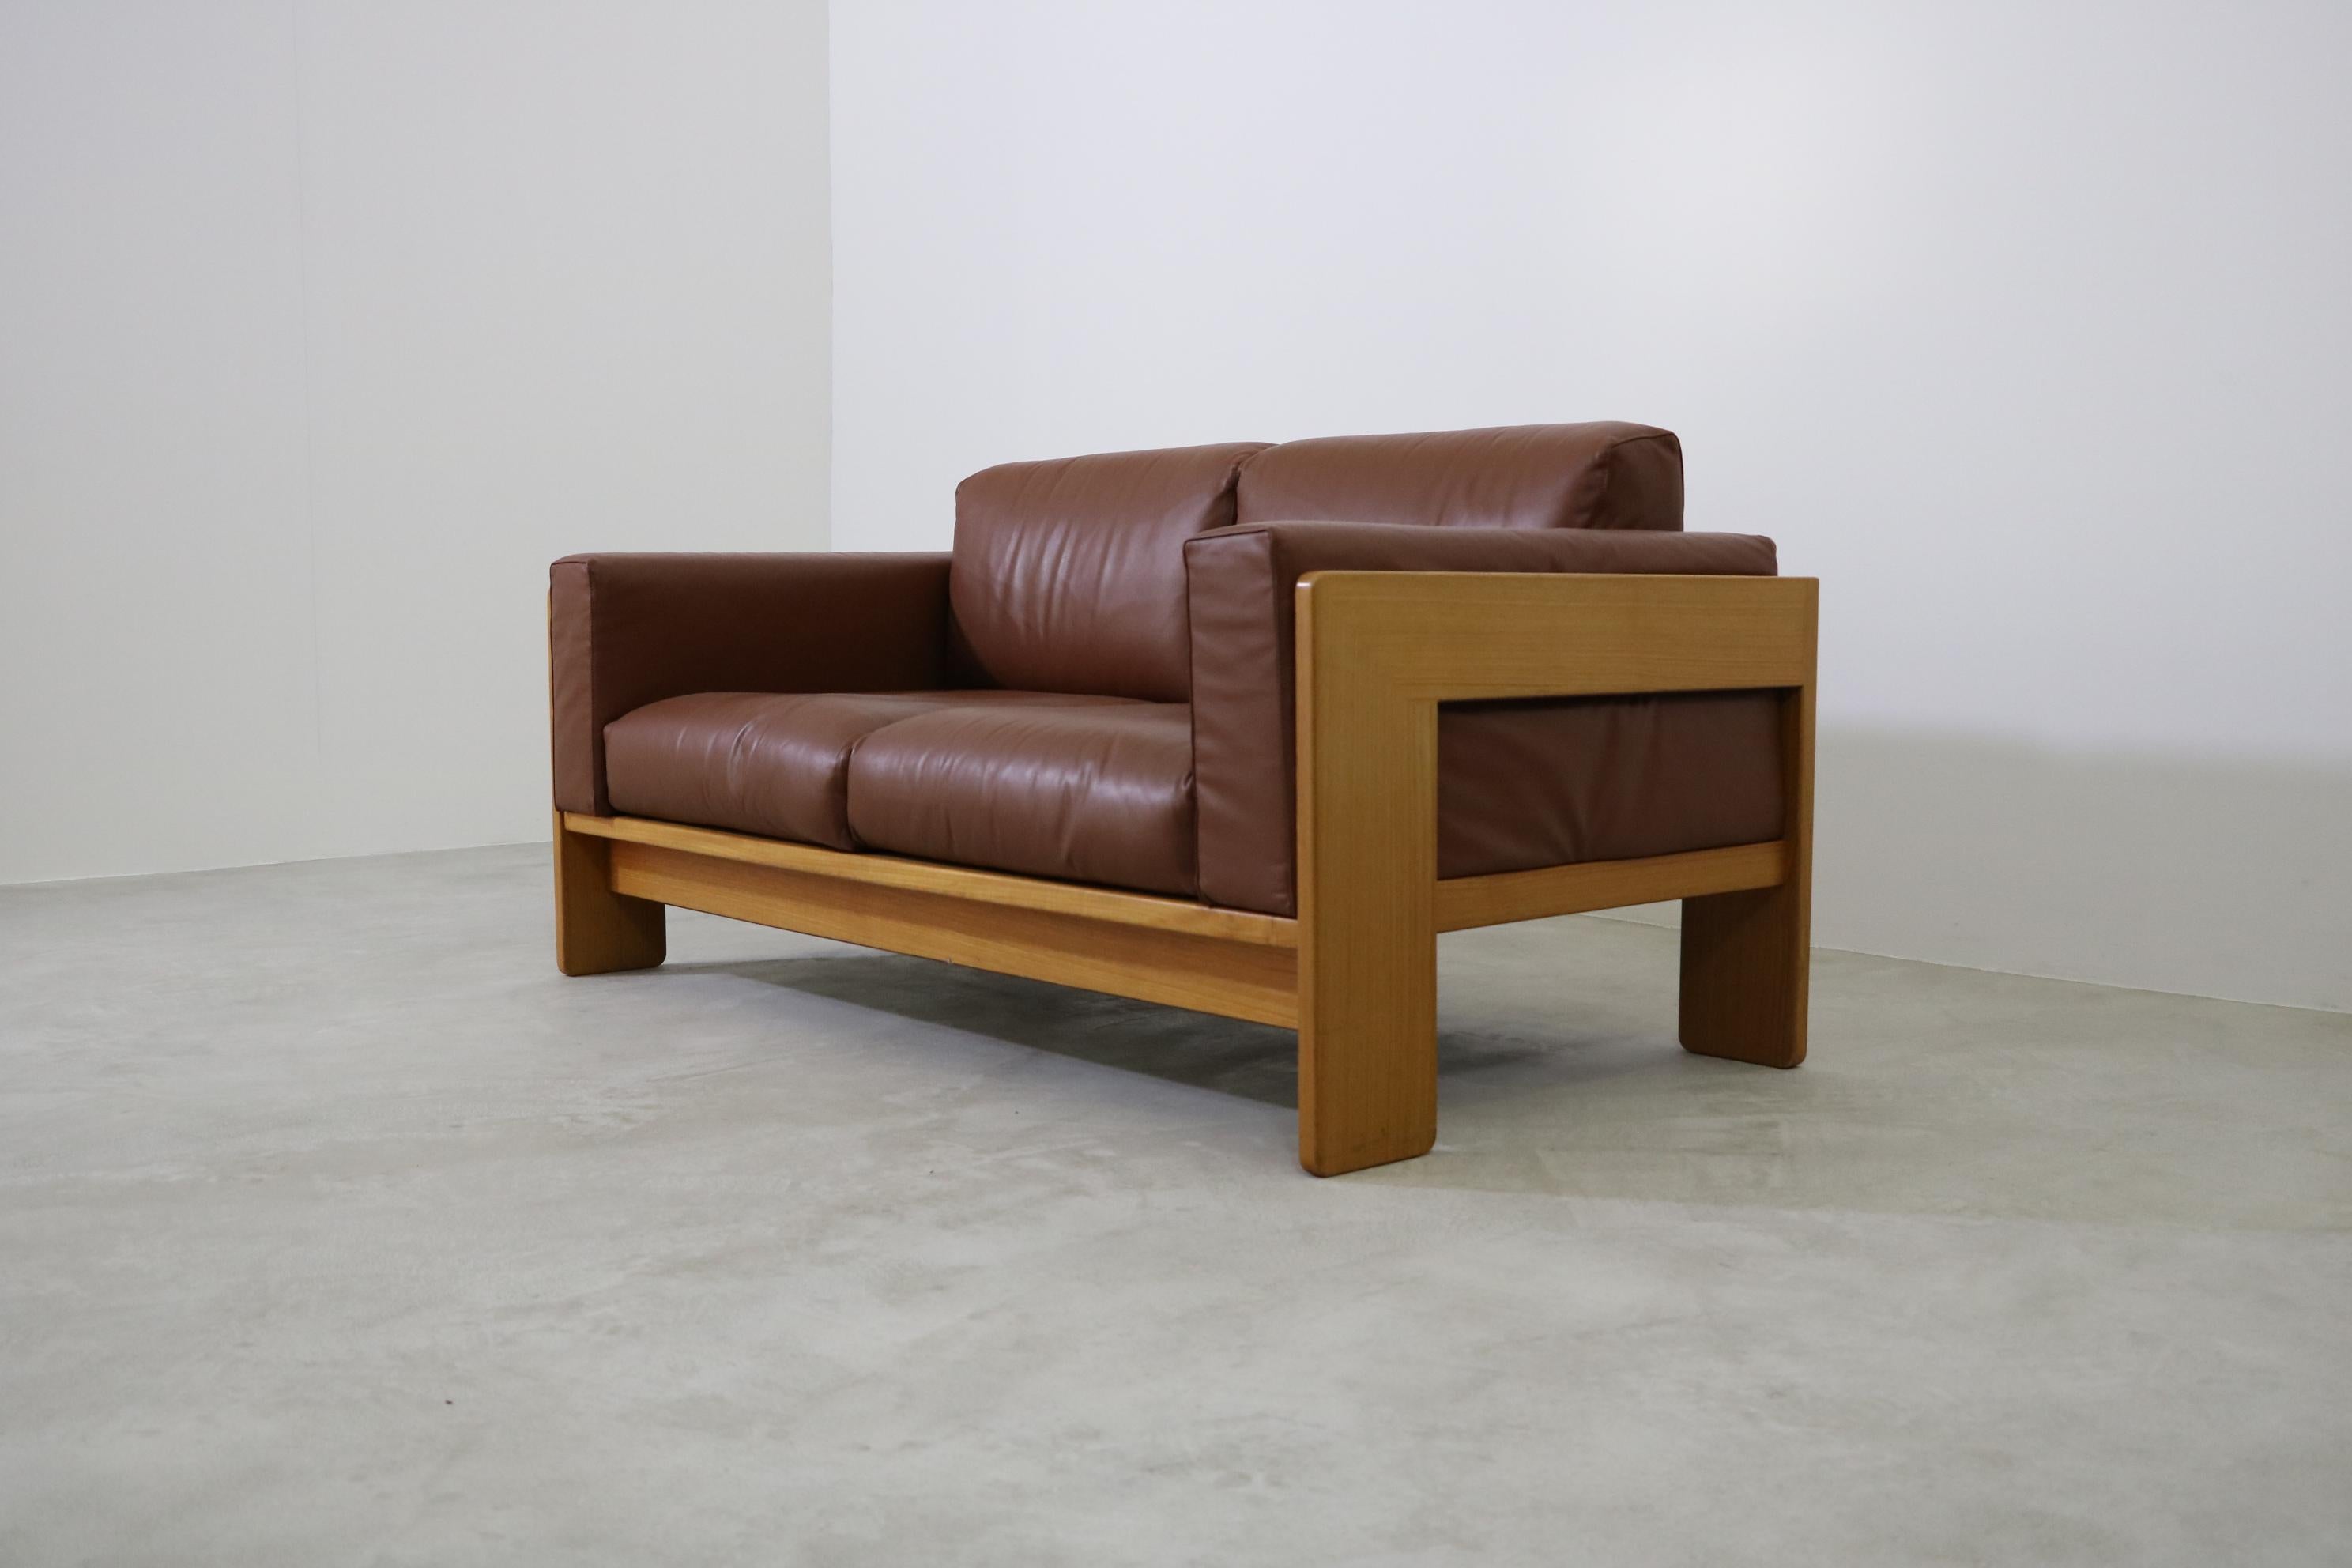 Knoll International 2-seater sofa model 'Bastiano' Design Tobia Scarpa leather cognac

A classic and chic two-seater sofa from the Bastiano series, designed by the iconic Italian designer duo Afra & Tobia Scarpa for Knoll, Italy, circa 1960.

As an